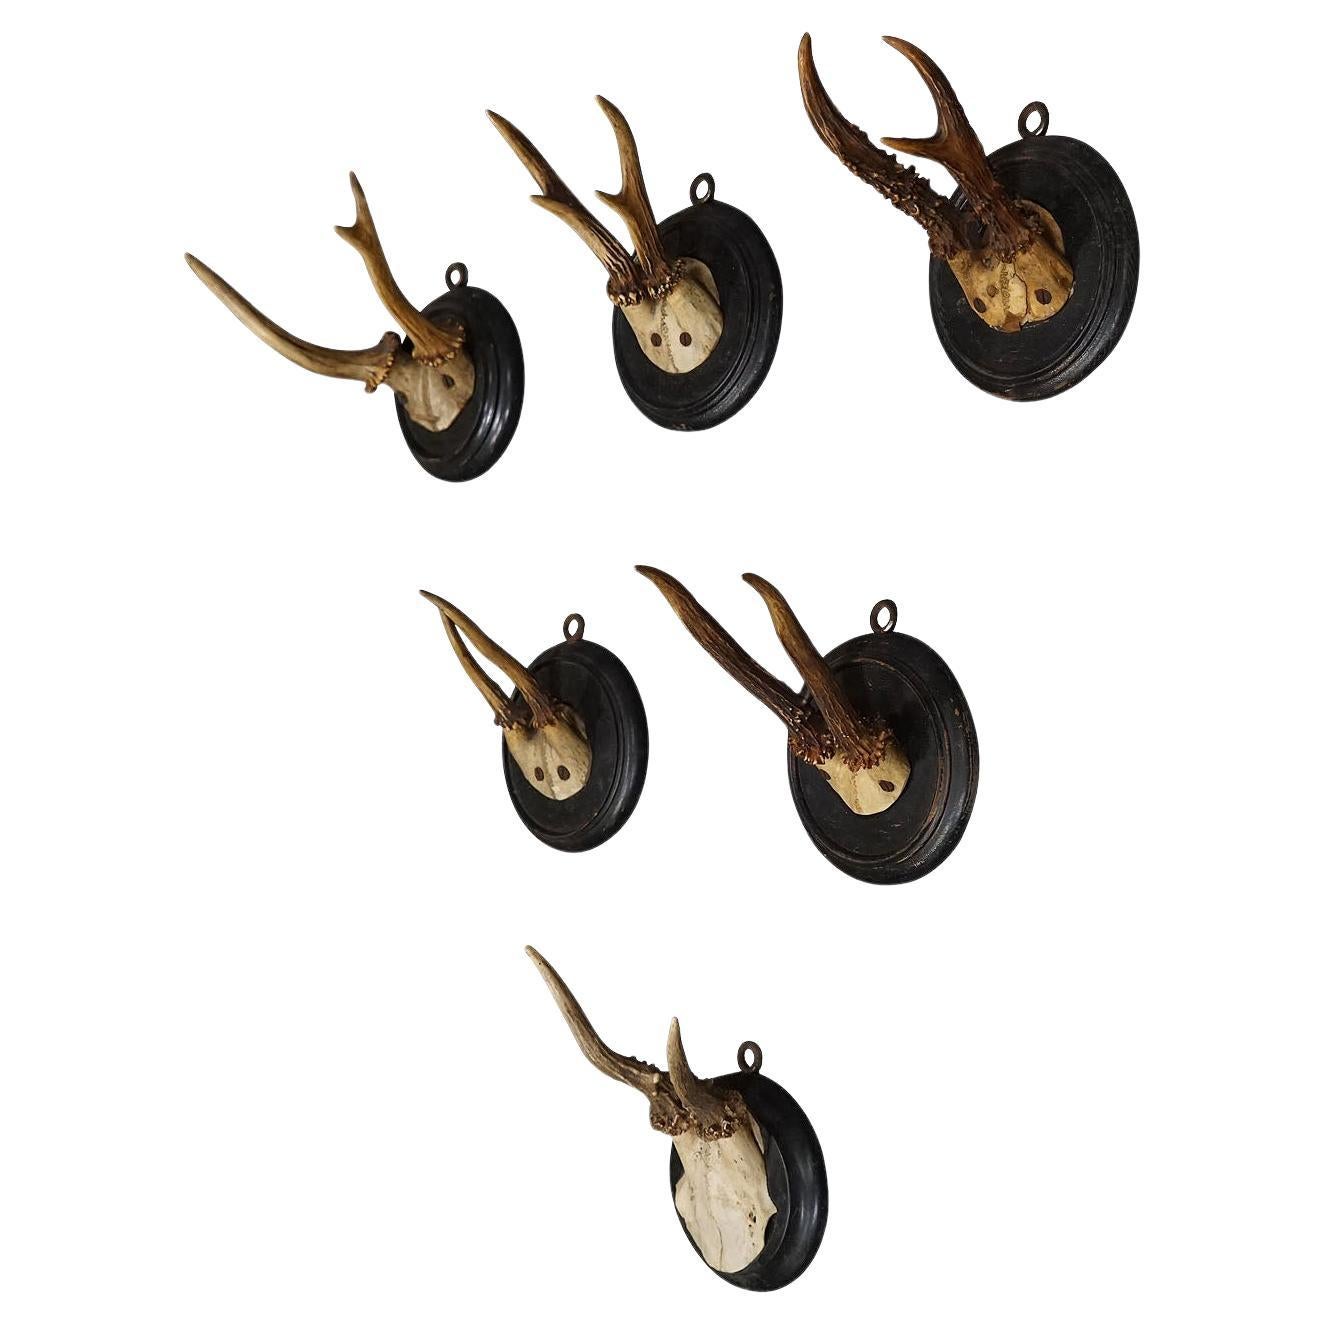 Six Antique Deer Trophies on Wooden Plaques, Germany, ca. 1900s For Sale